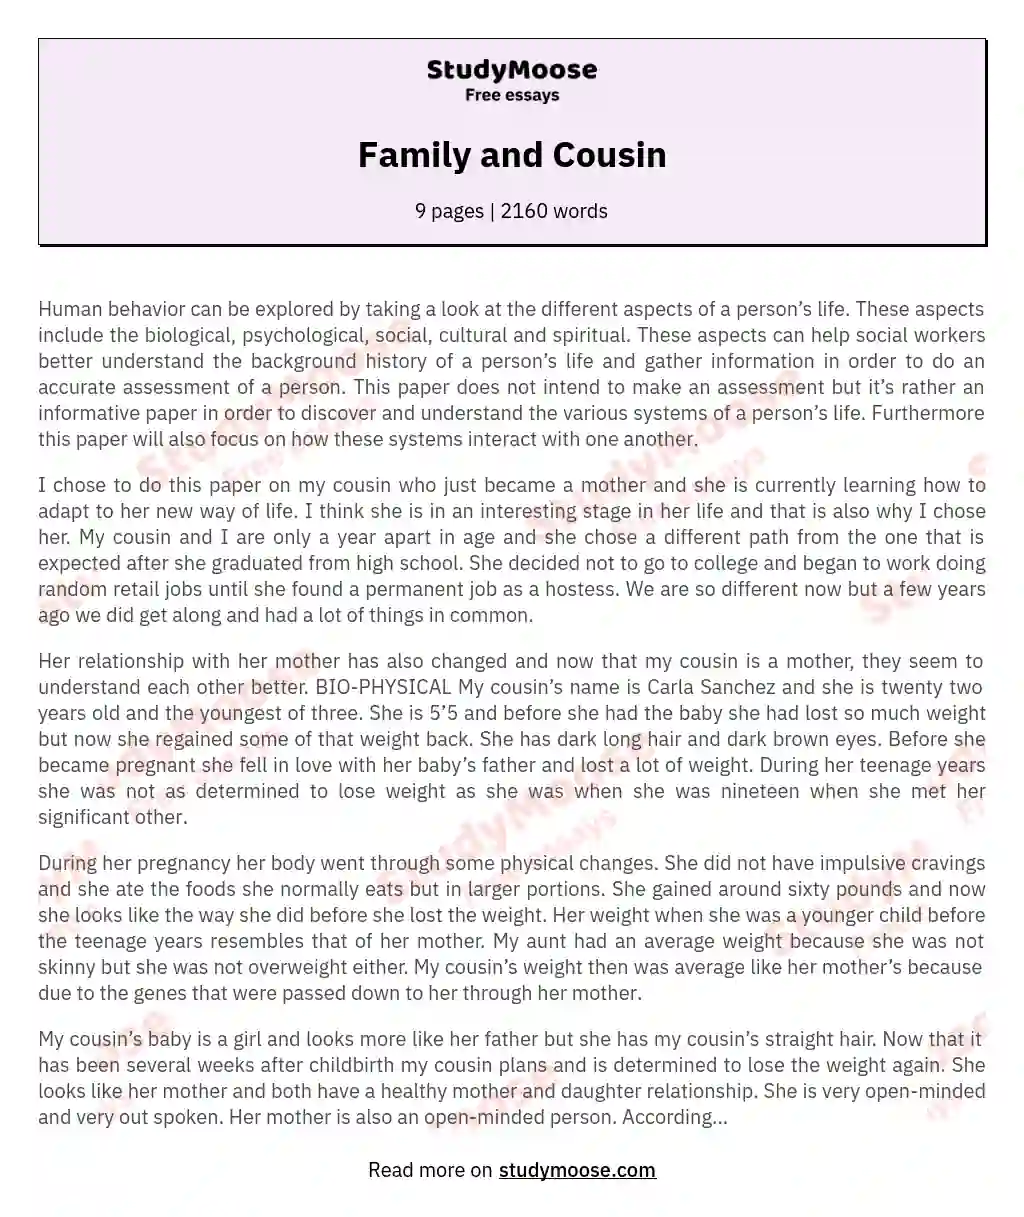 Family and Cousin essay